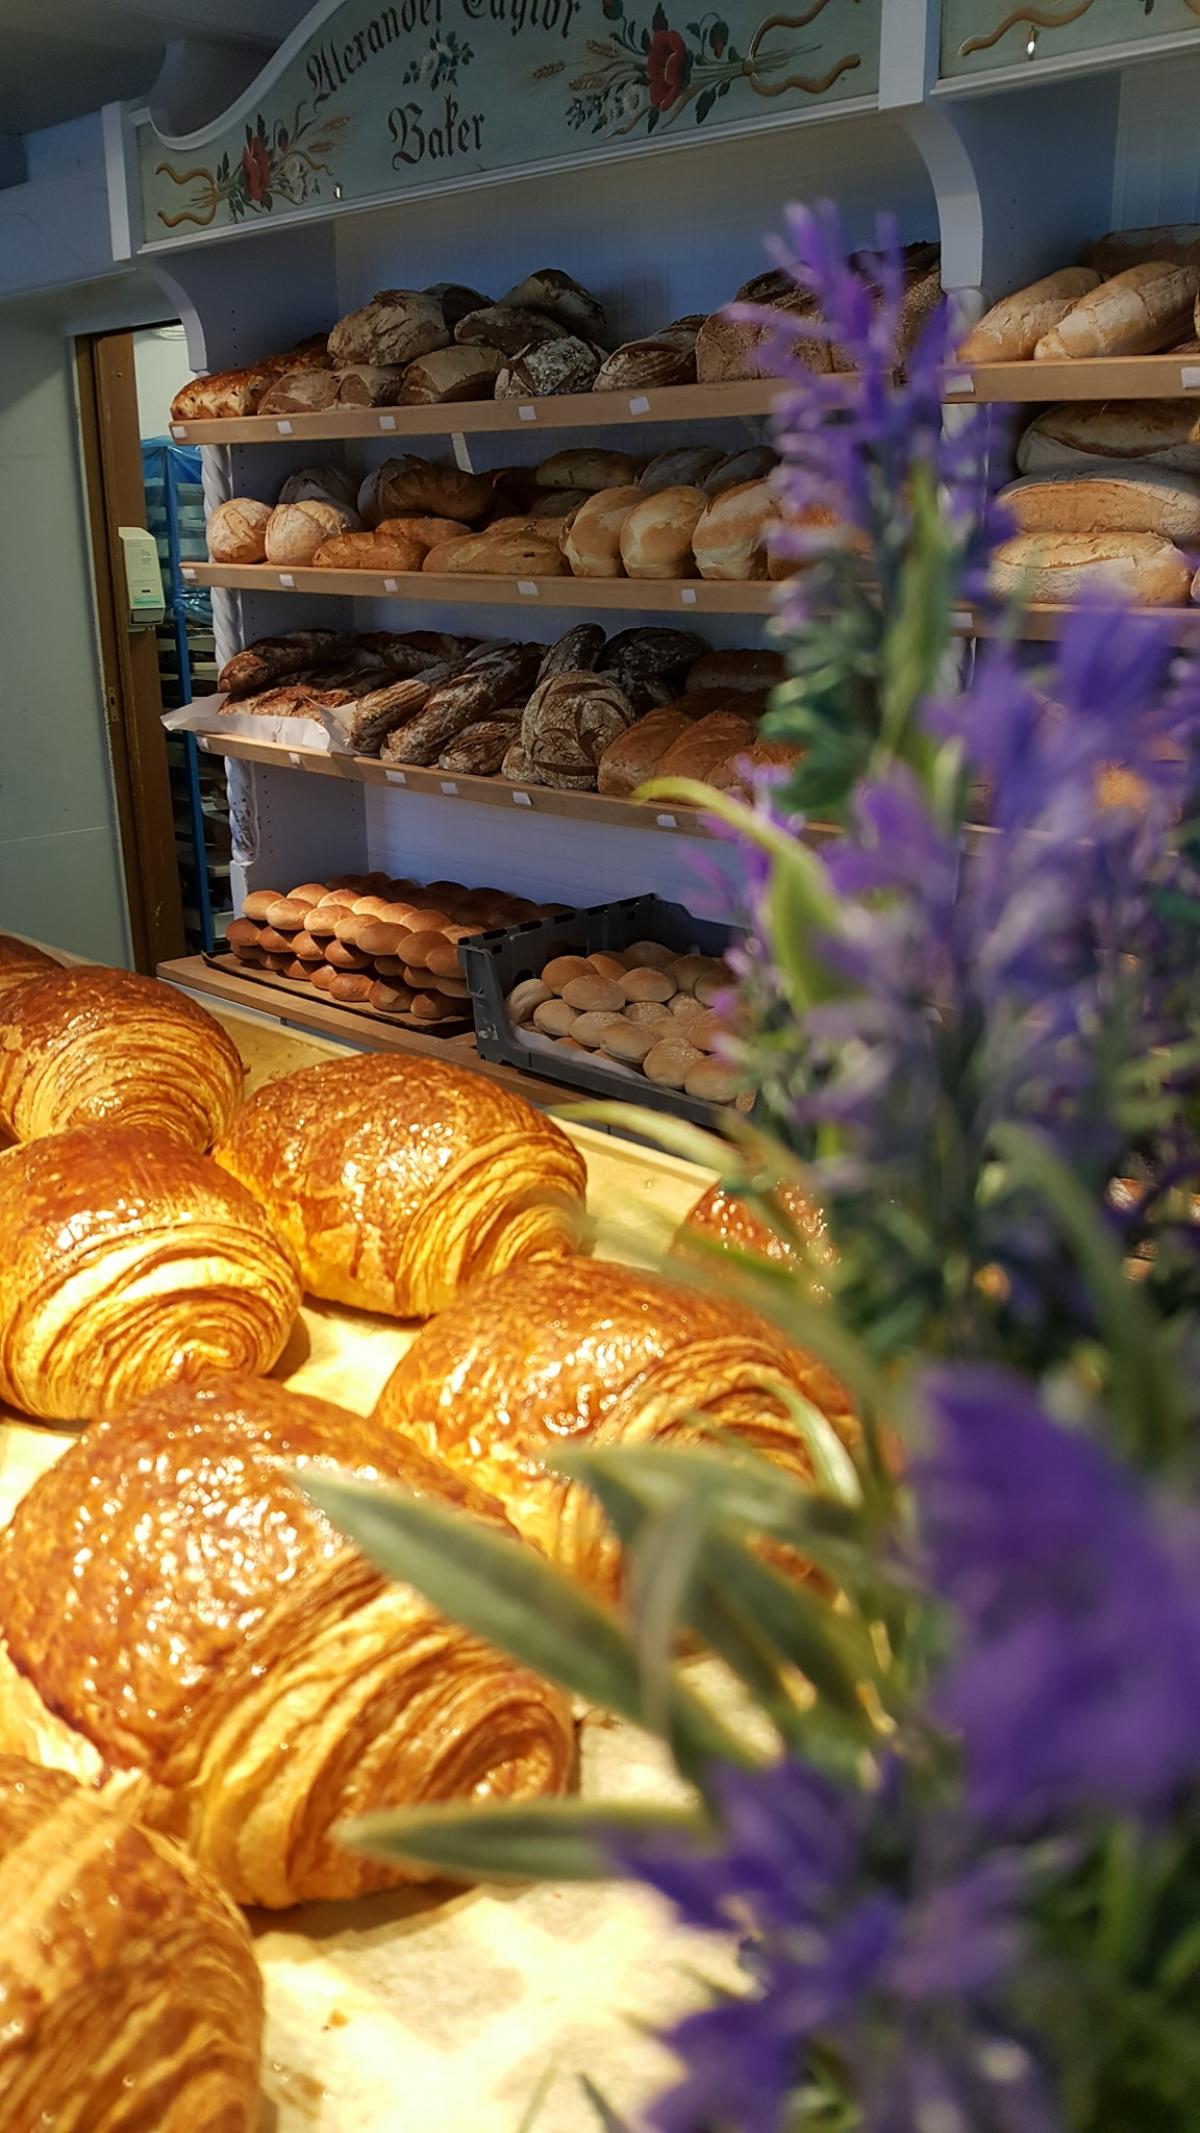 Images from Alexander Taylor Bakery & Café